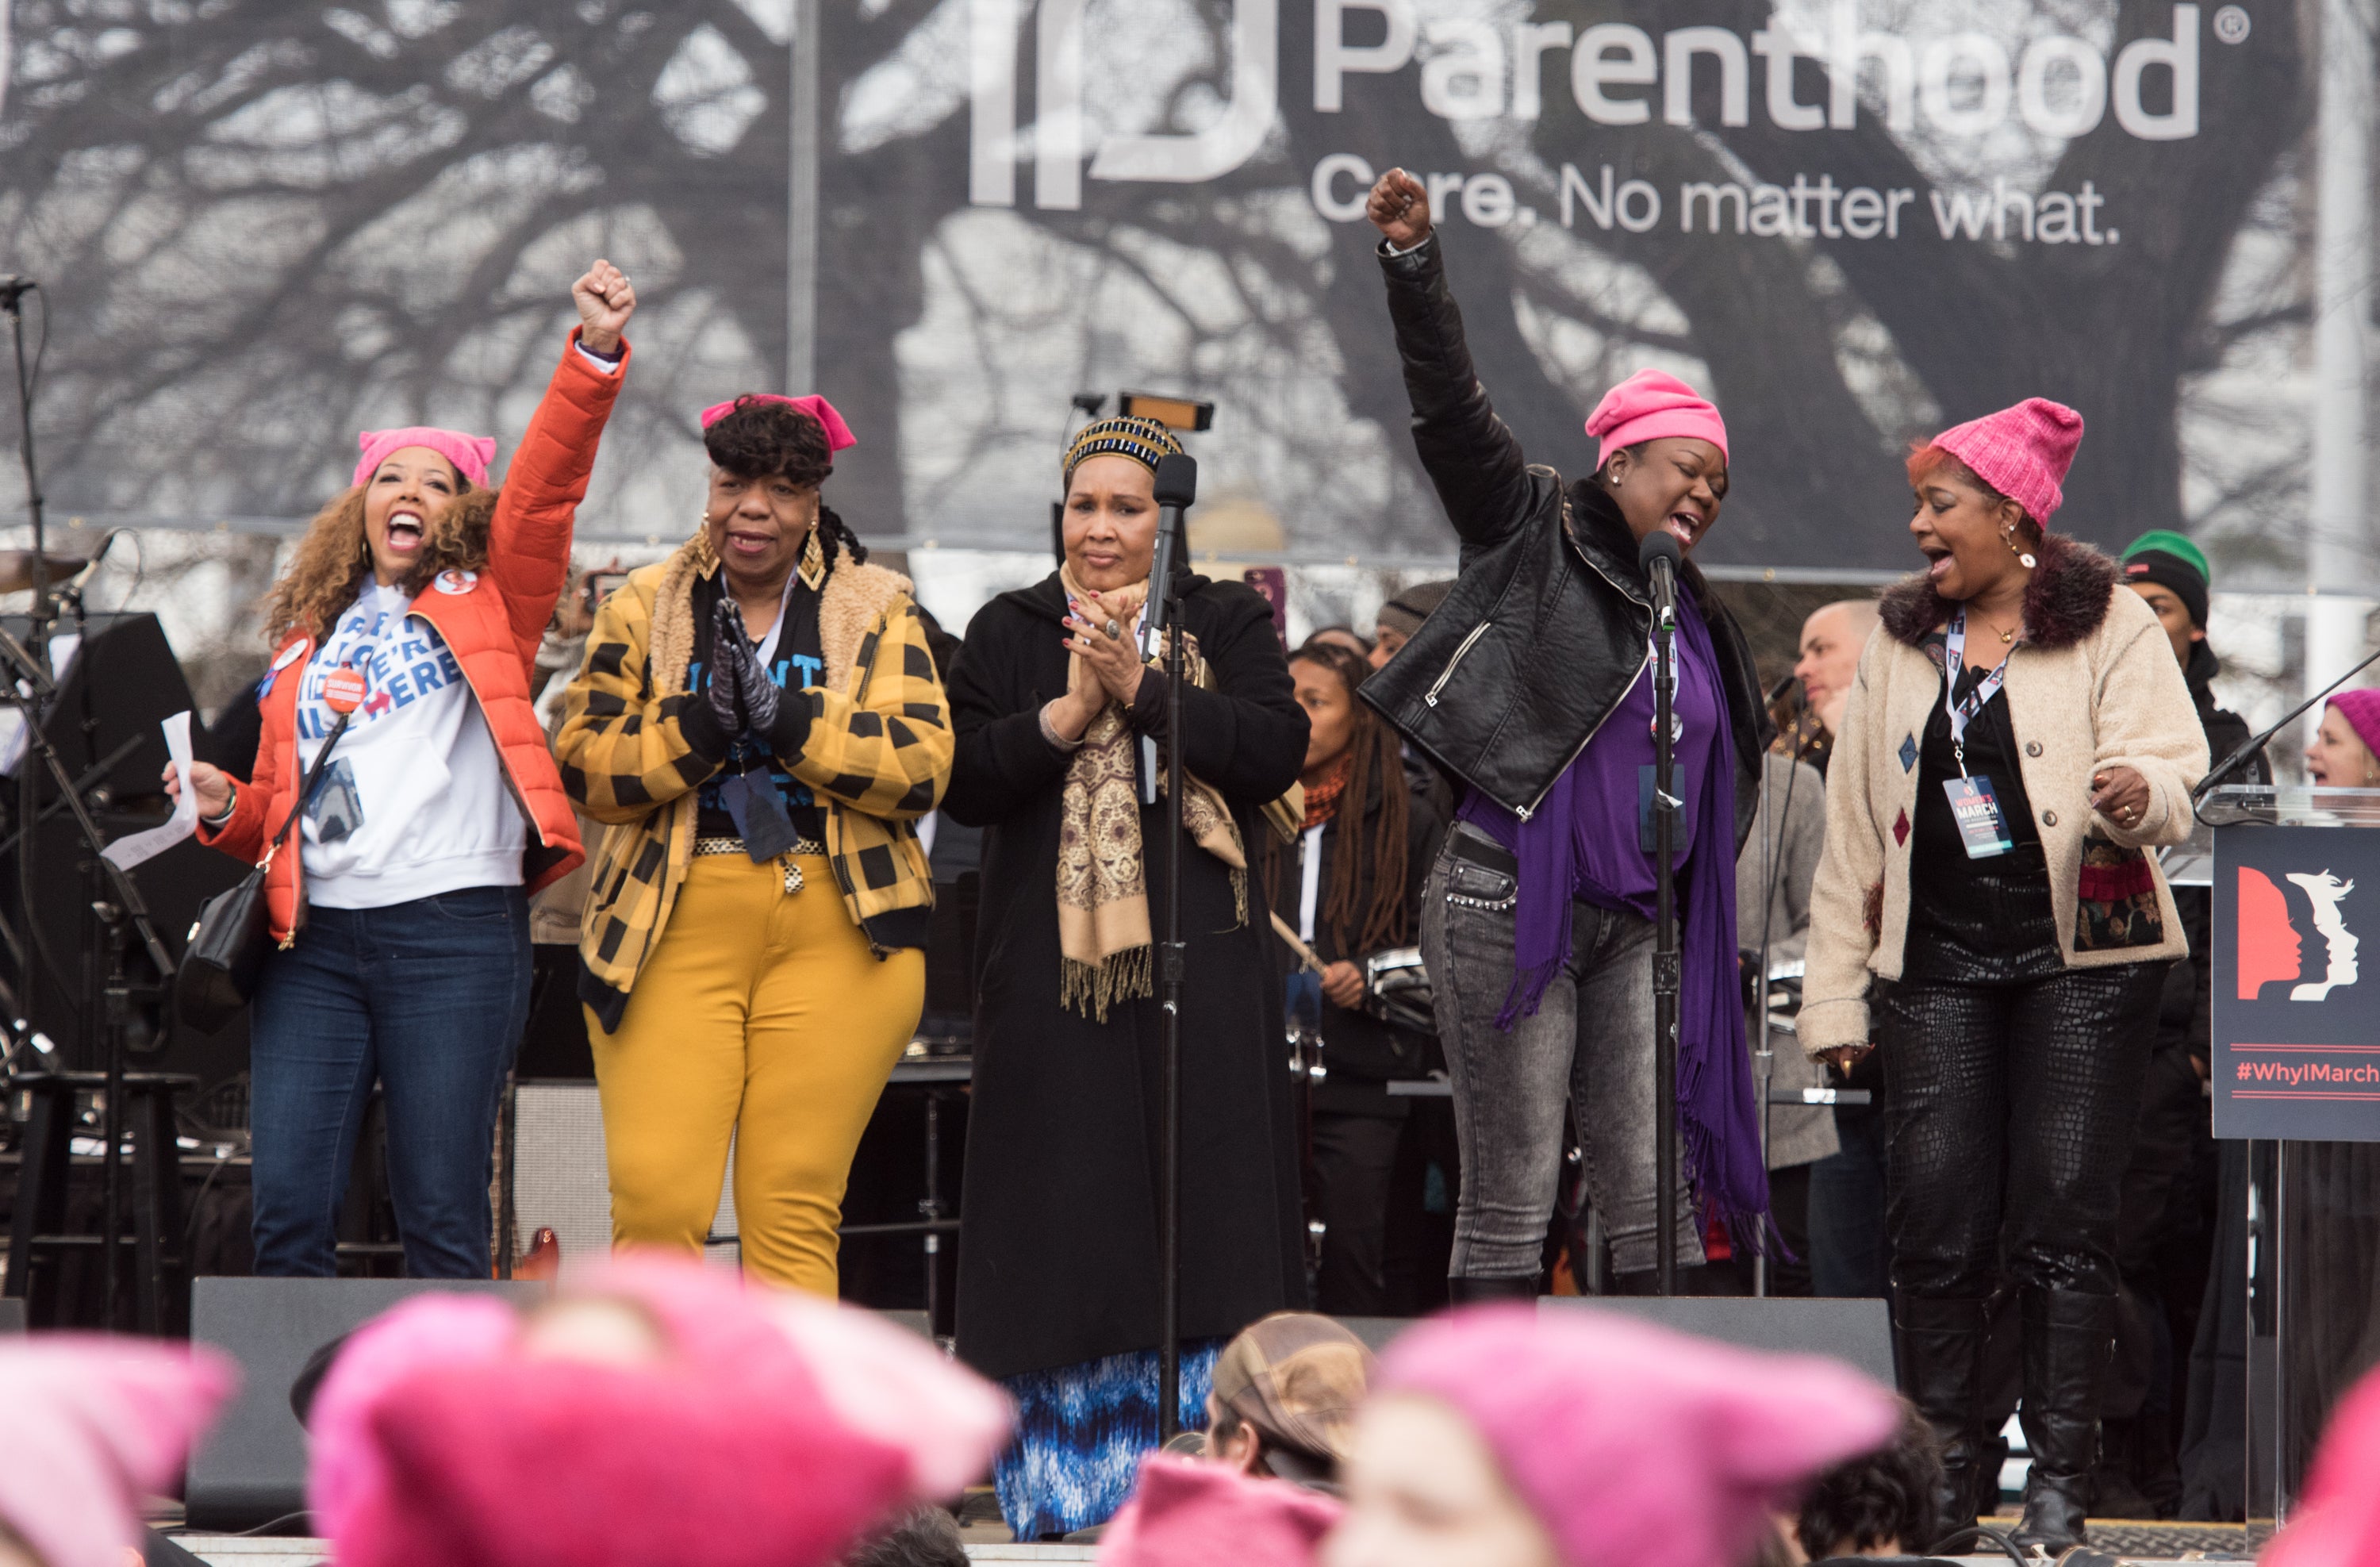 Lucy McBath: We Cannot Stop With One Day Or One March — We Must Continue To Fight